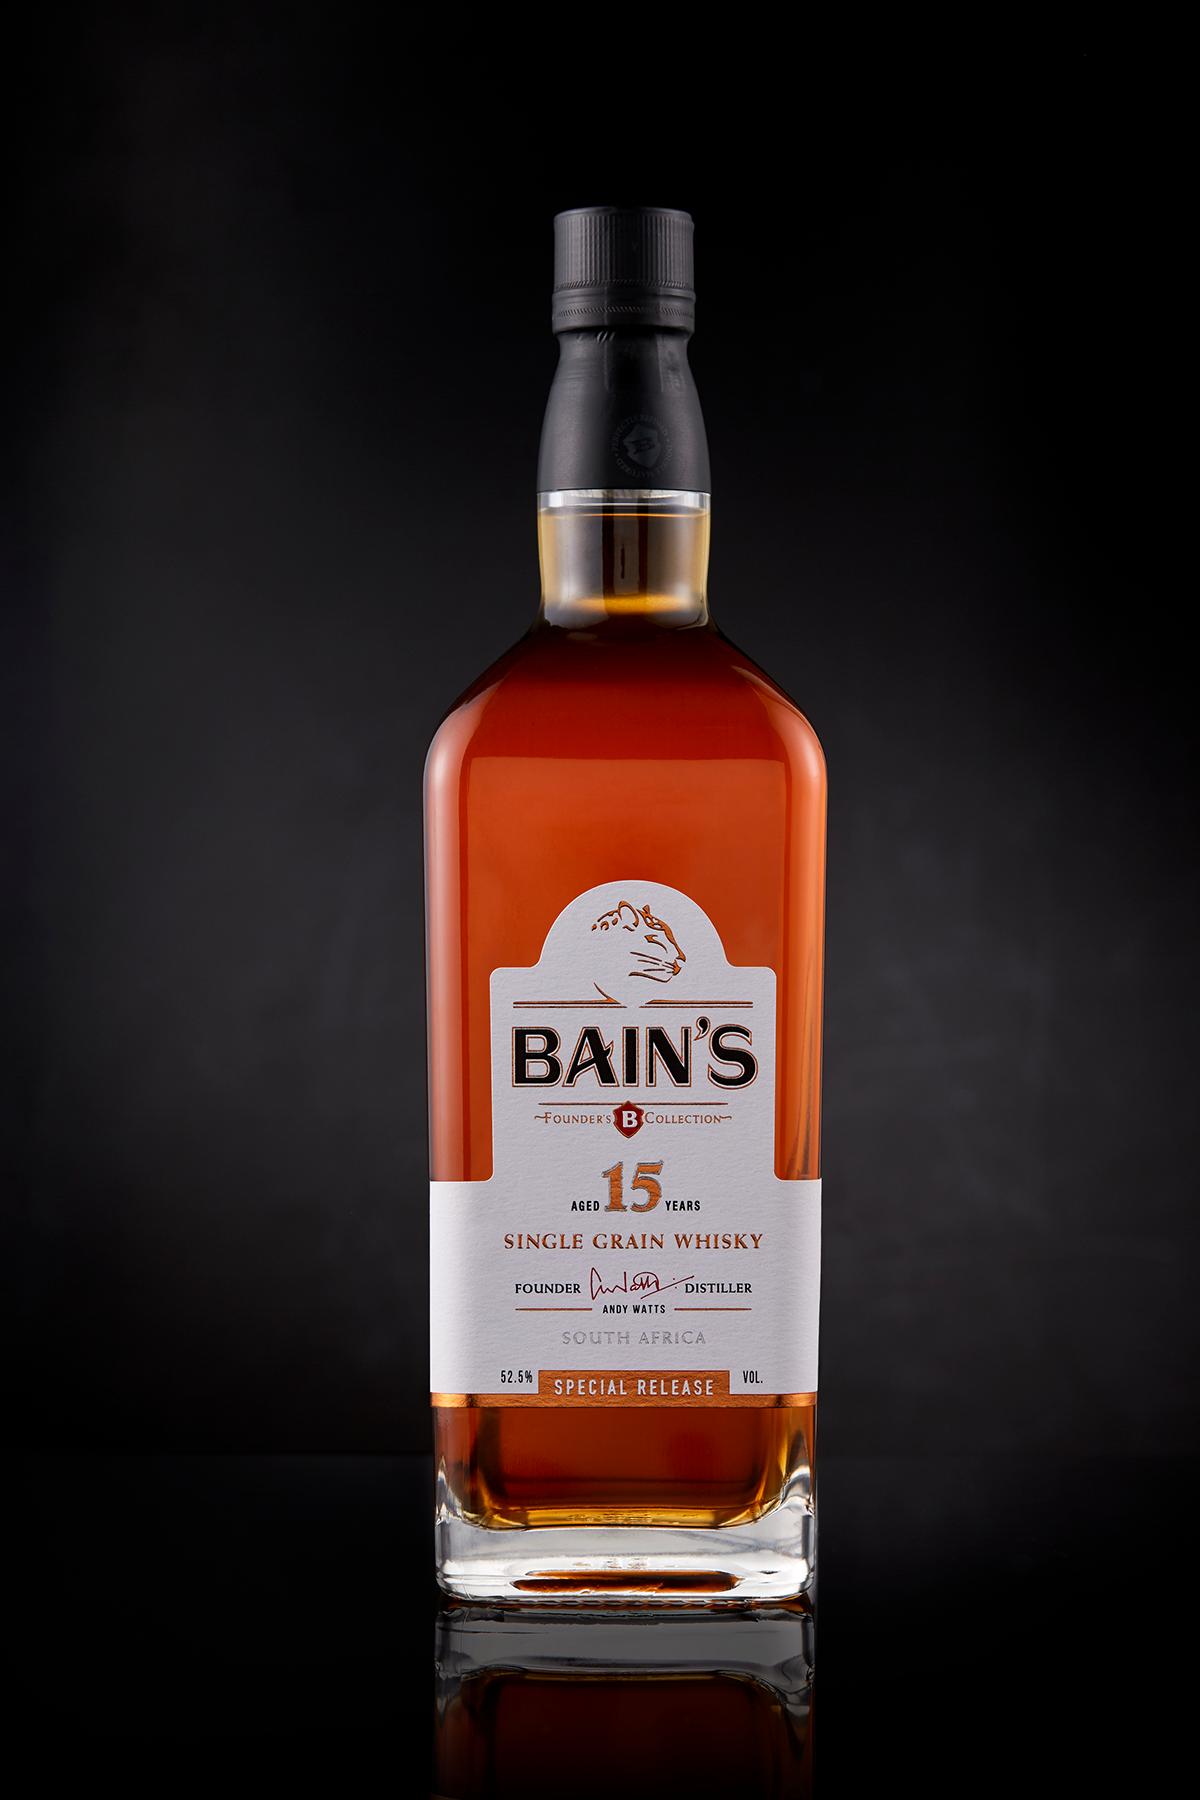 Packaging packaging design Whisky special edition bains whisky copper foil emboss